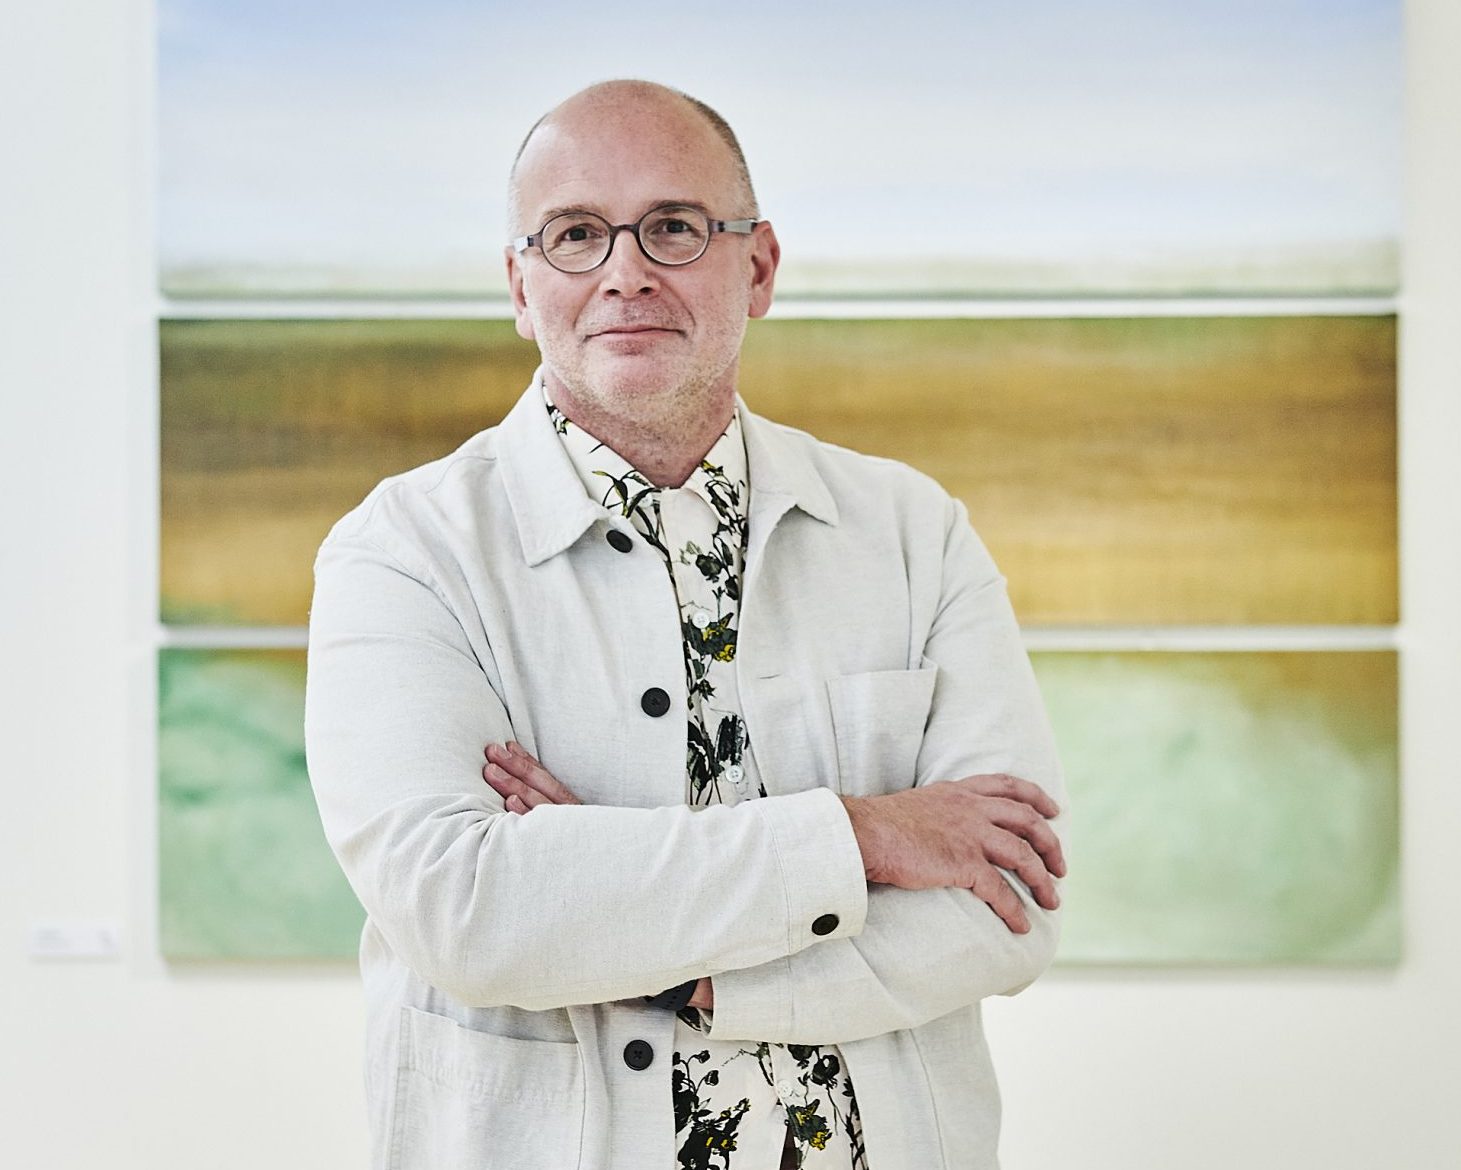 Simon Ofield Kerr is in main focus. He is wearing a cream jacket and floral shirt. His arms are crossed and he is smiling. There is an abstract painting behind him in the background.